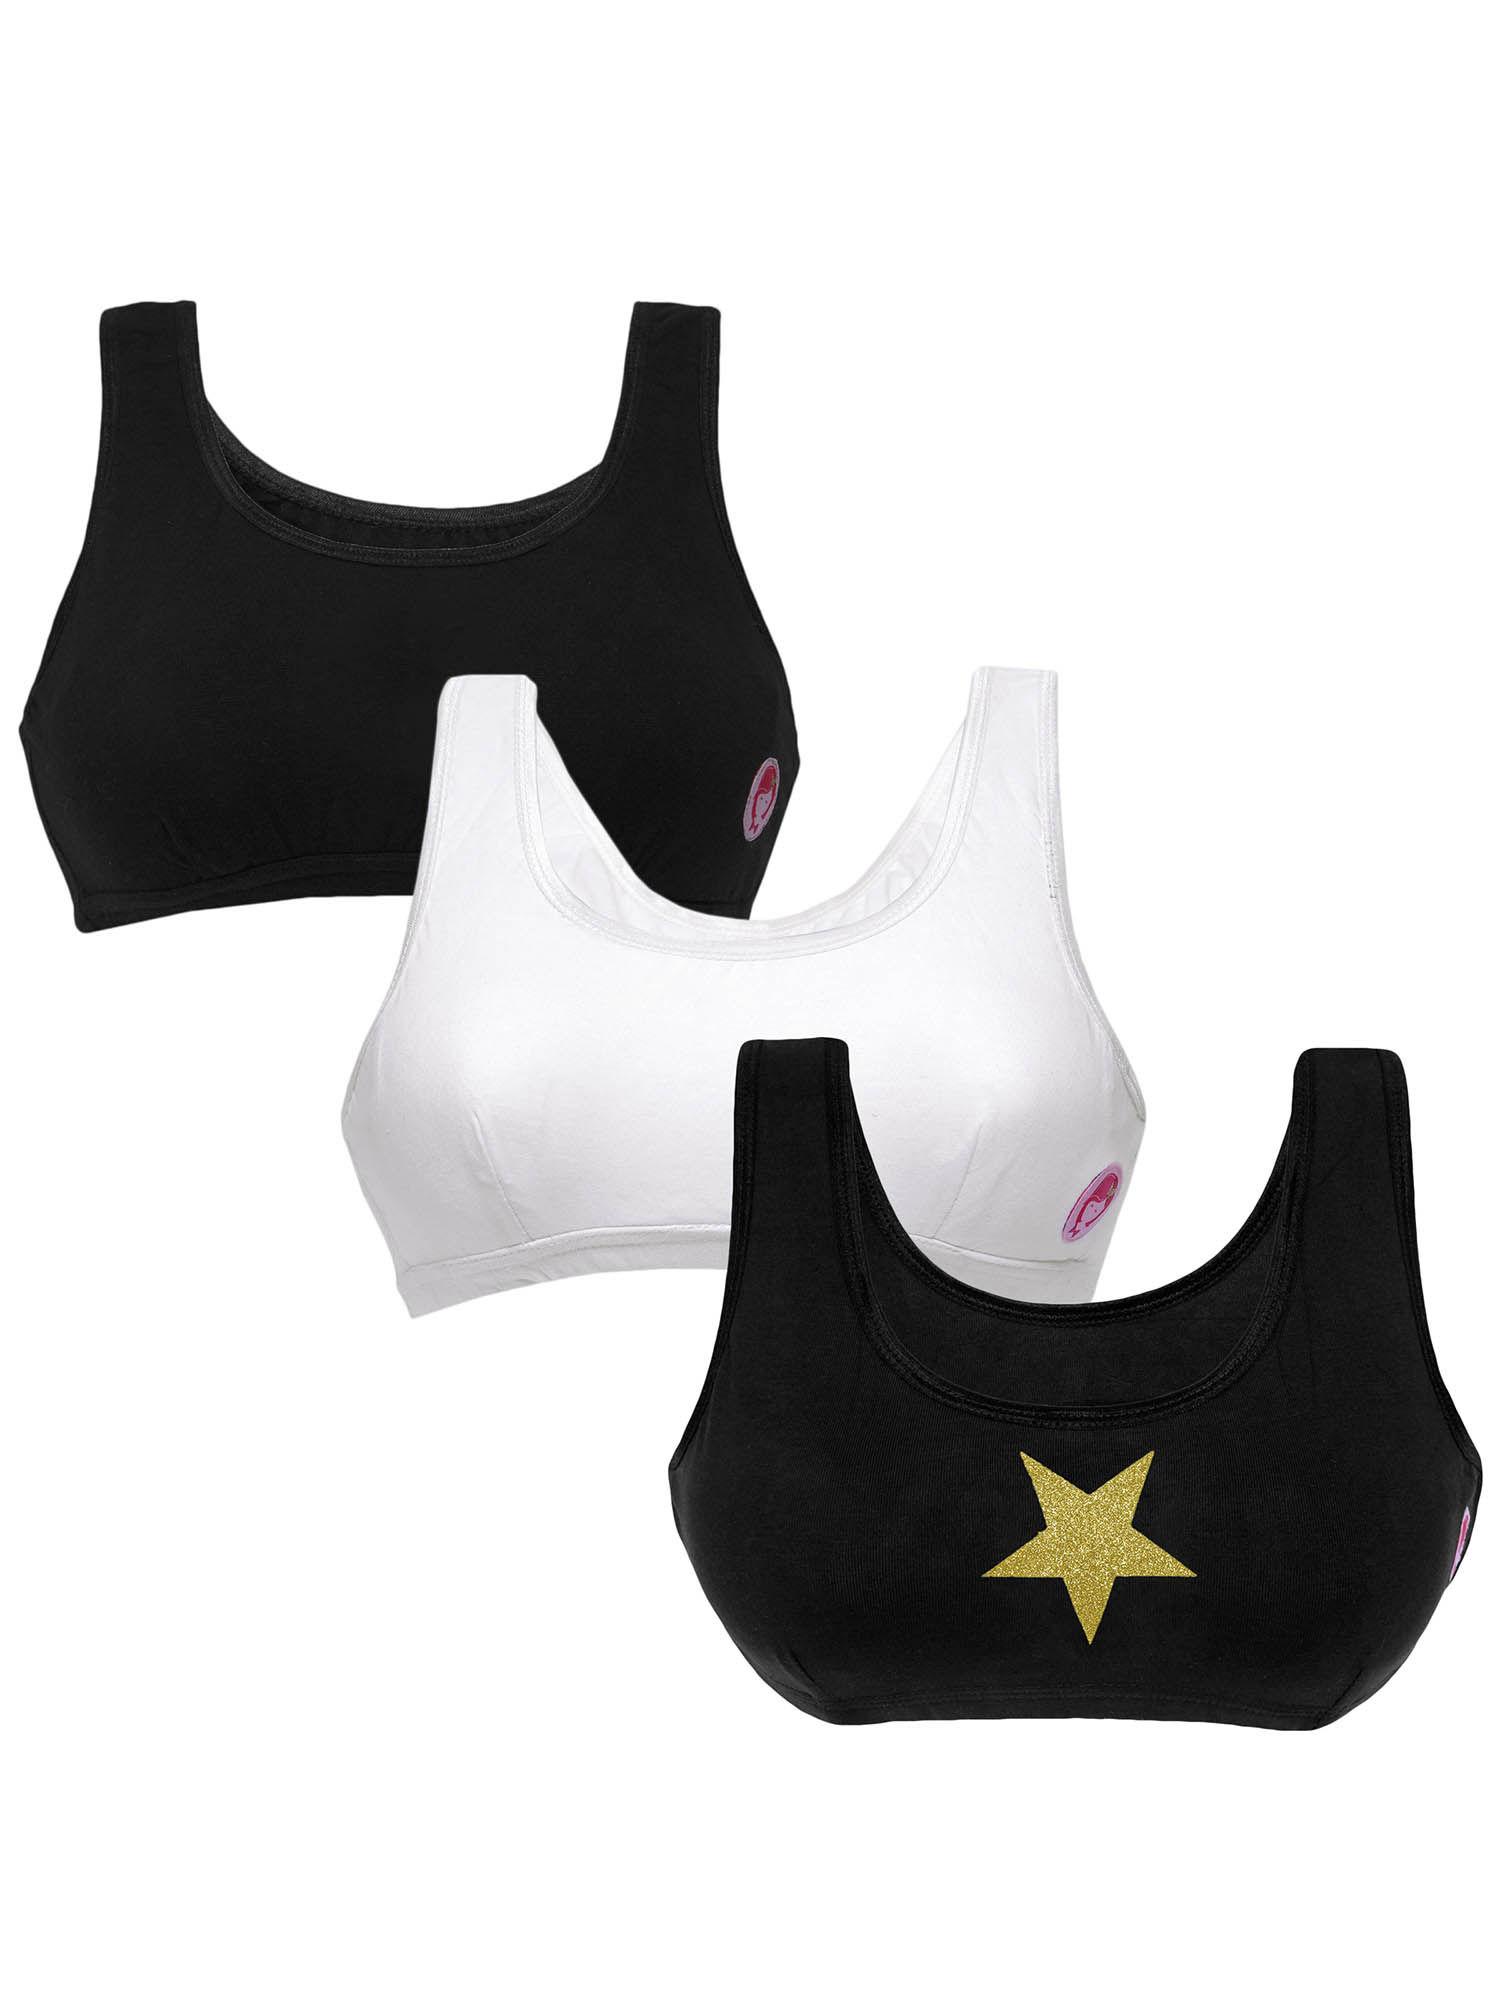 set-of-3-non-wired-beginner/sports-bras-for-girls-black-and-white